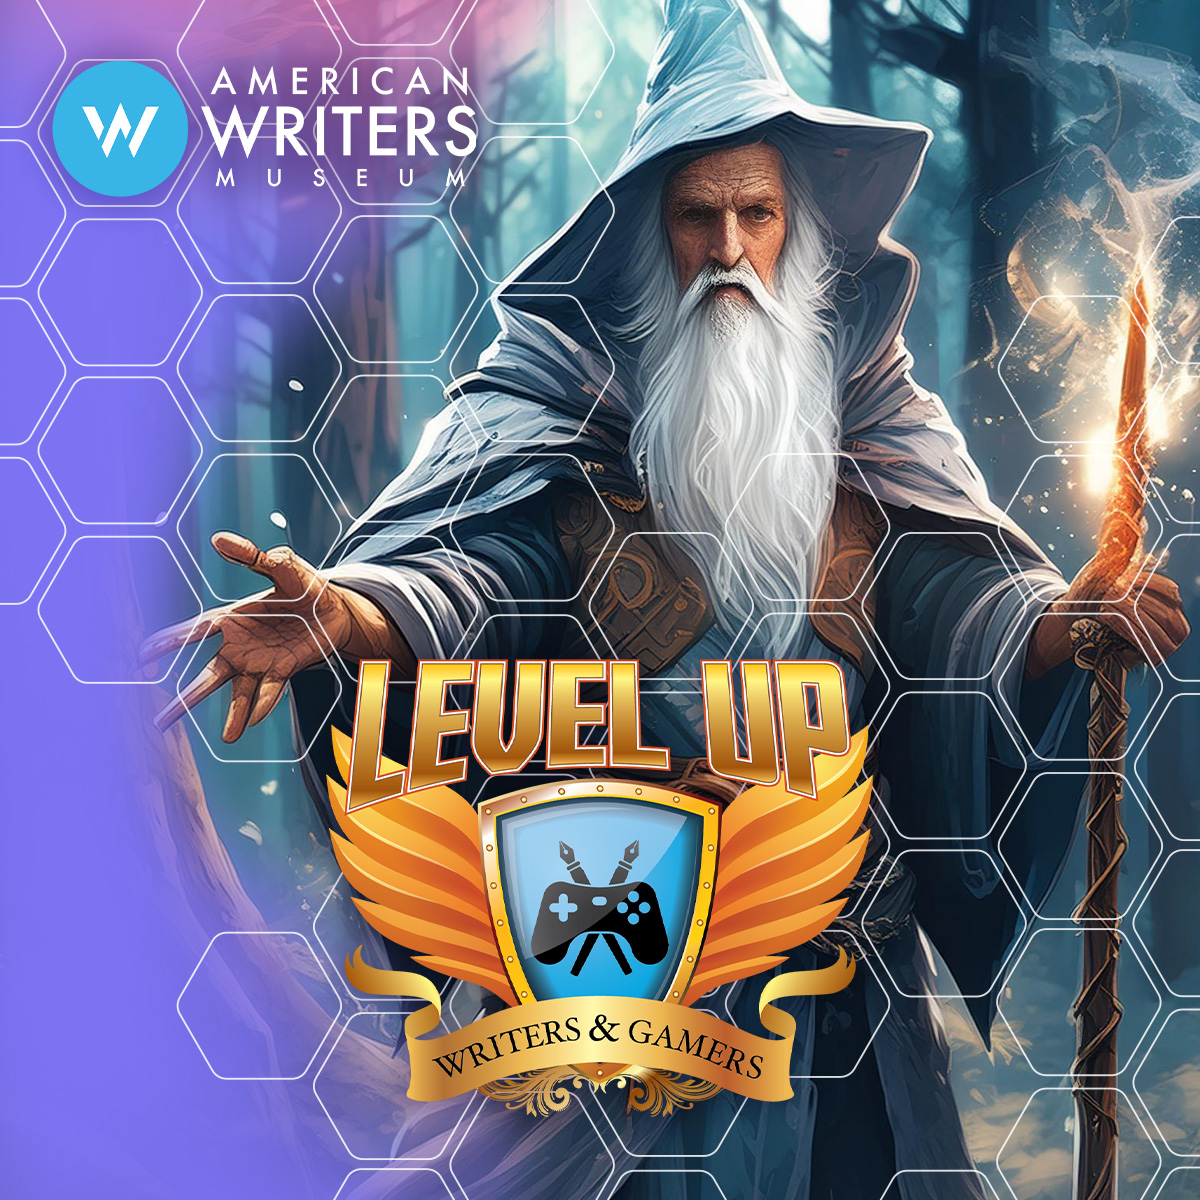 In 2 weeks, you can experience our exciting new exhibit, Level Up: Writers & Gamers! The exhibit guides visitors into the world of game writing from the 1970s to the present. Charge your controllers, grab your dice and join the story at Level Up: Writers & Gamers. You’re up next!